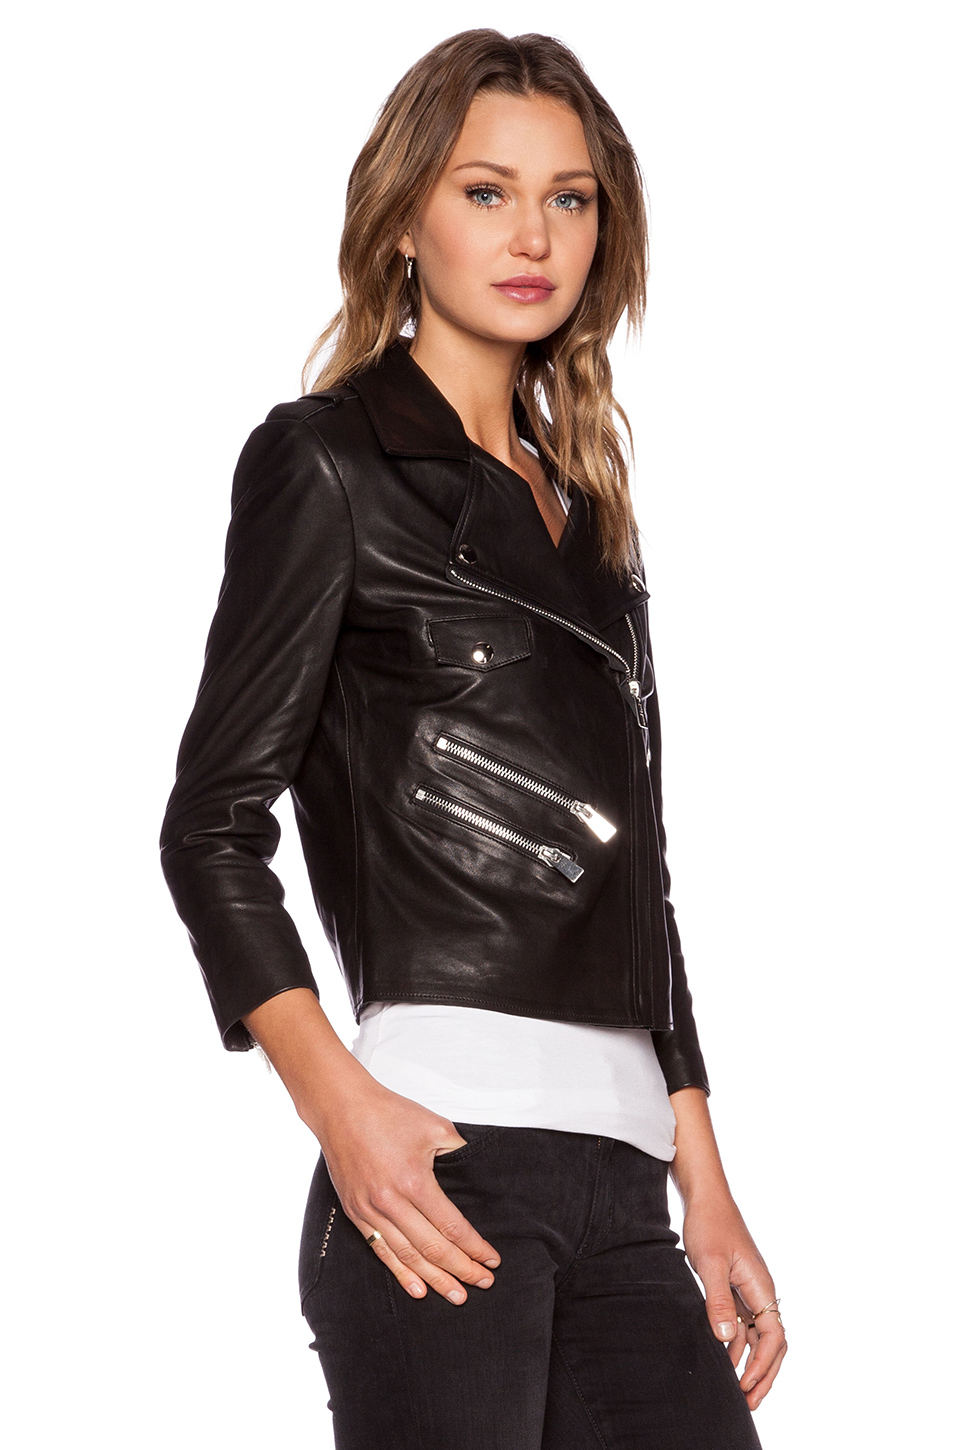 Lyst - Anine Bing Cropped Leather Jacket in Black